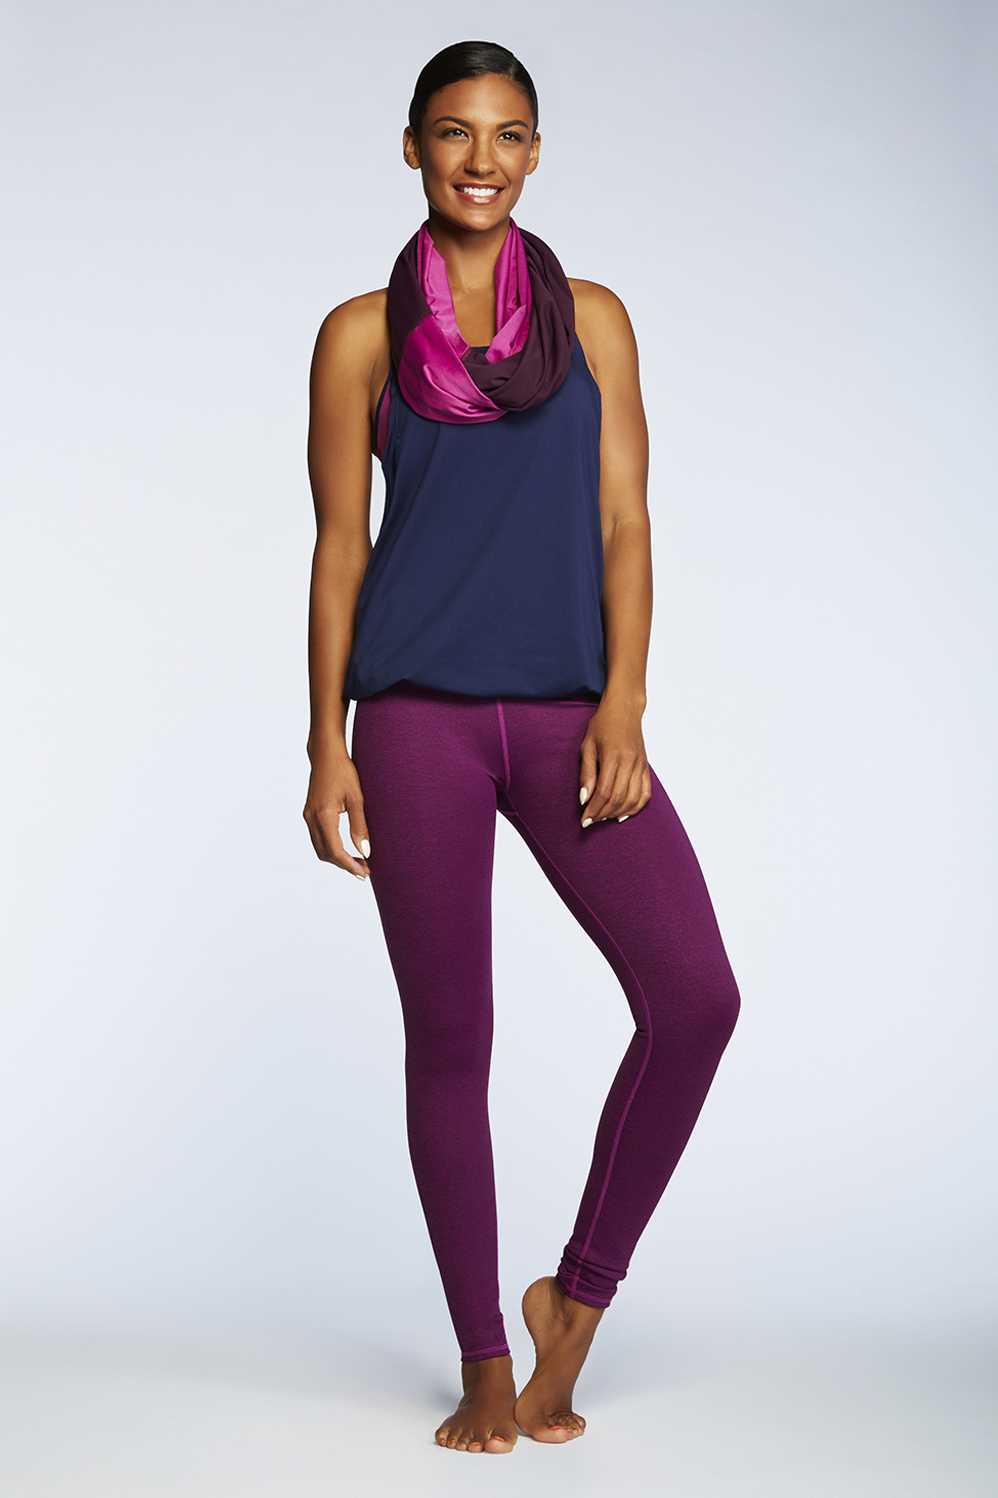 My outfits from fabletics & ratings